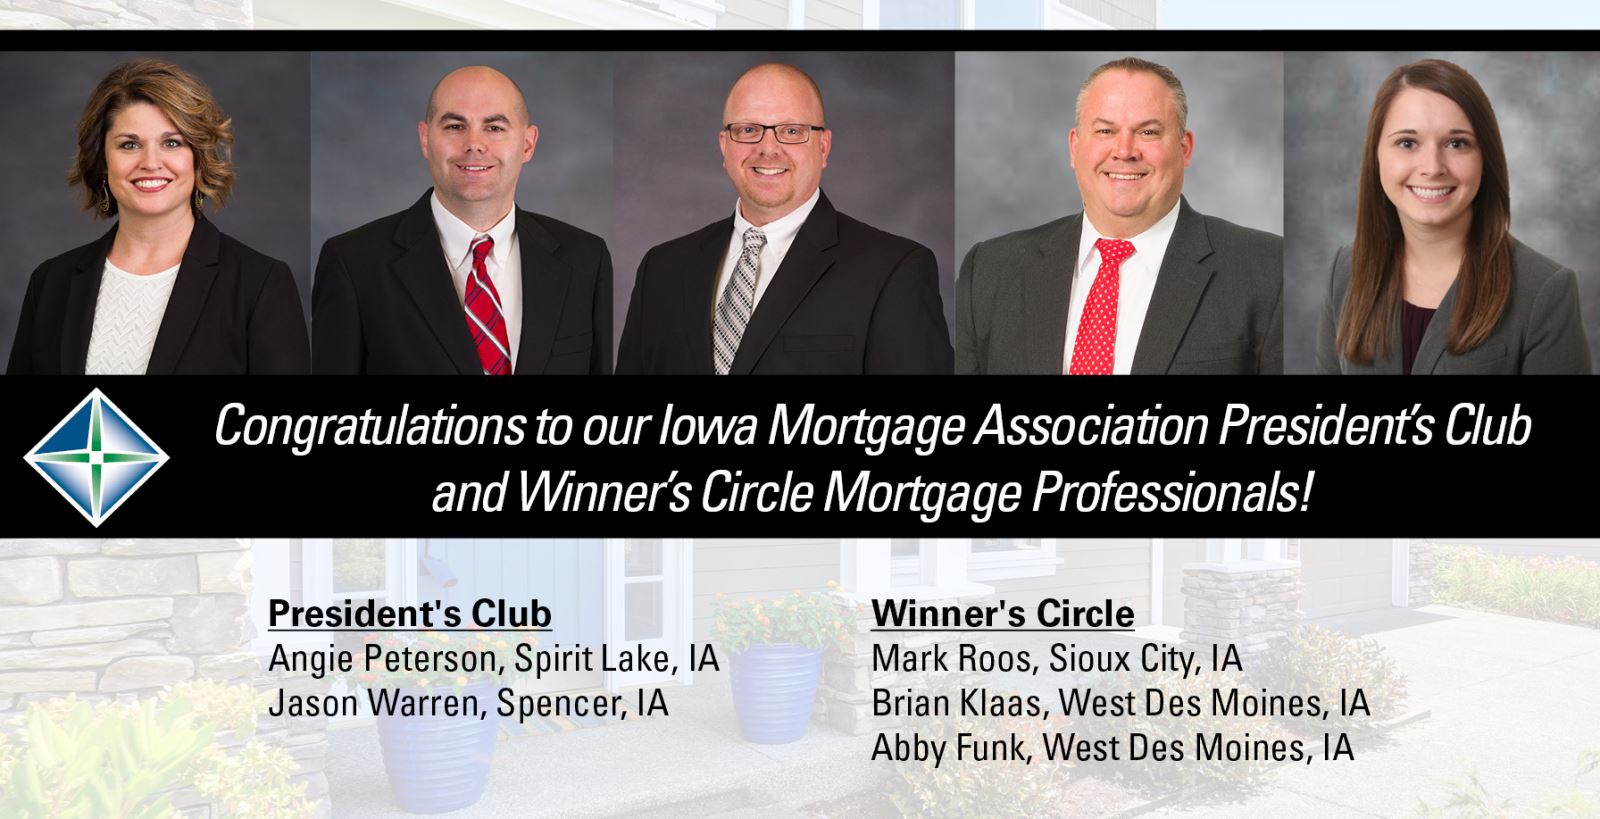 Images of our Presidents and Winner circles mortgage bankers